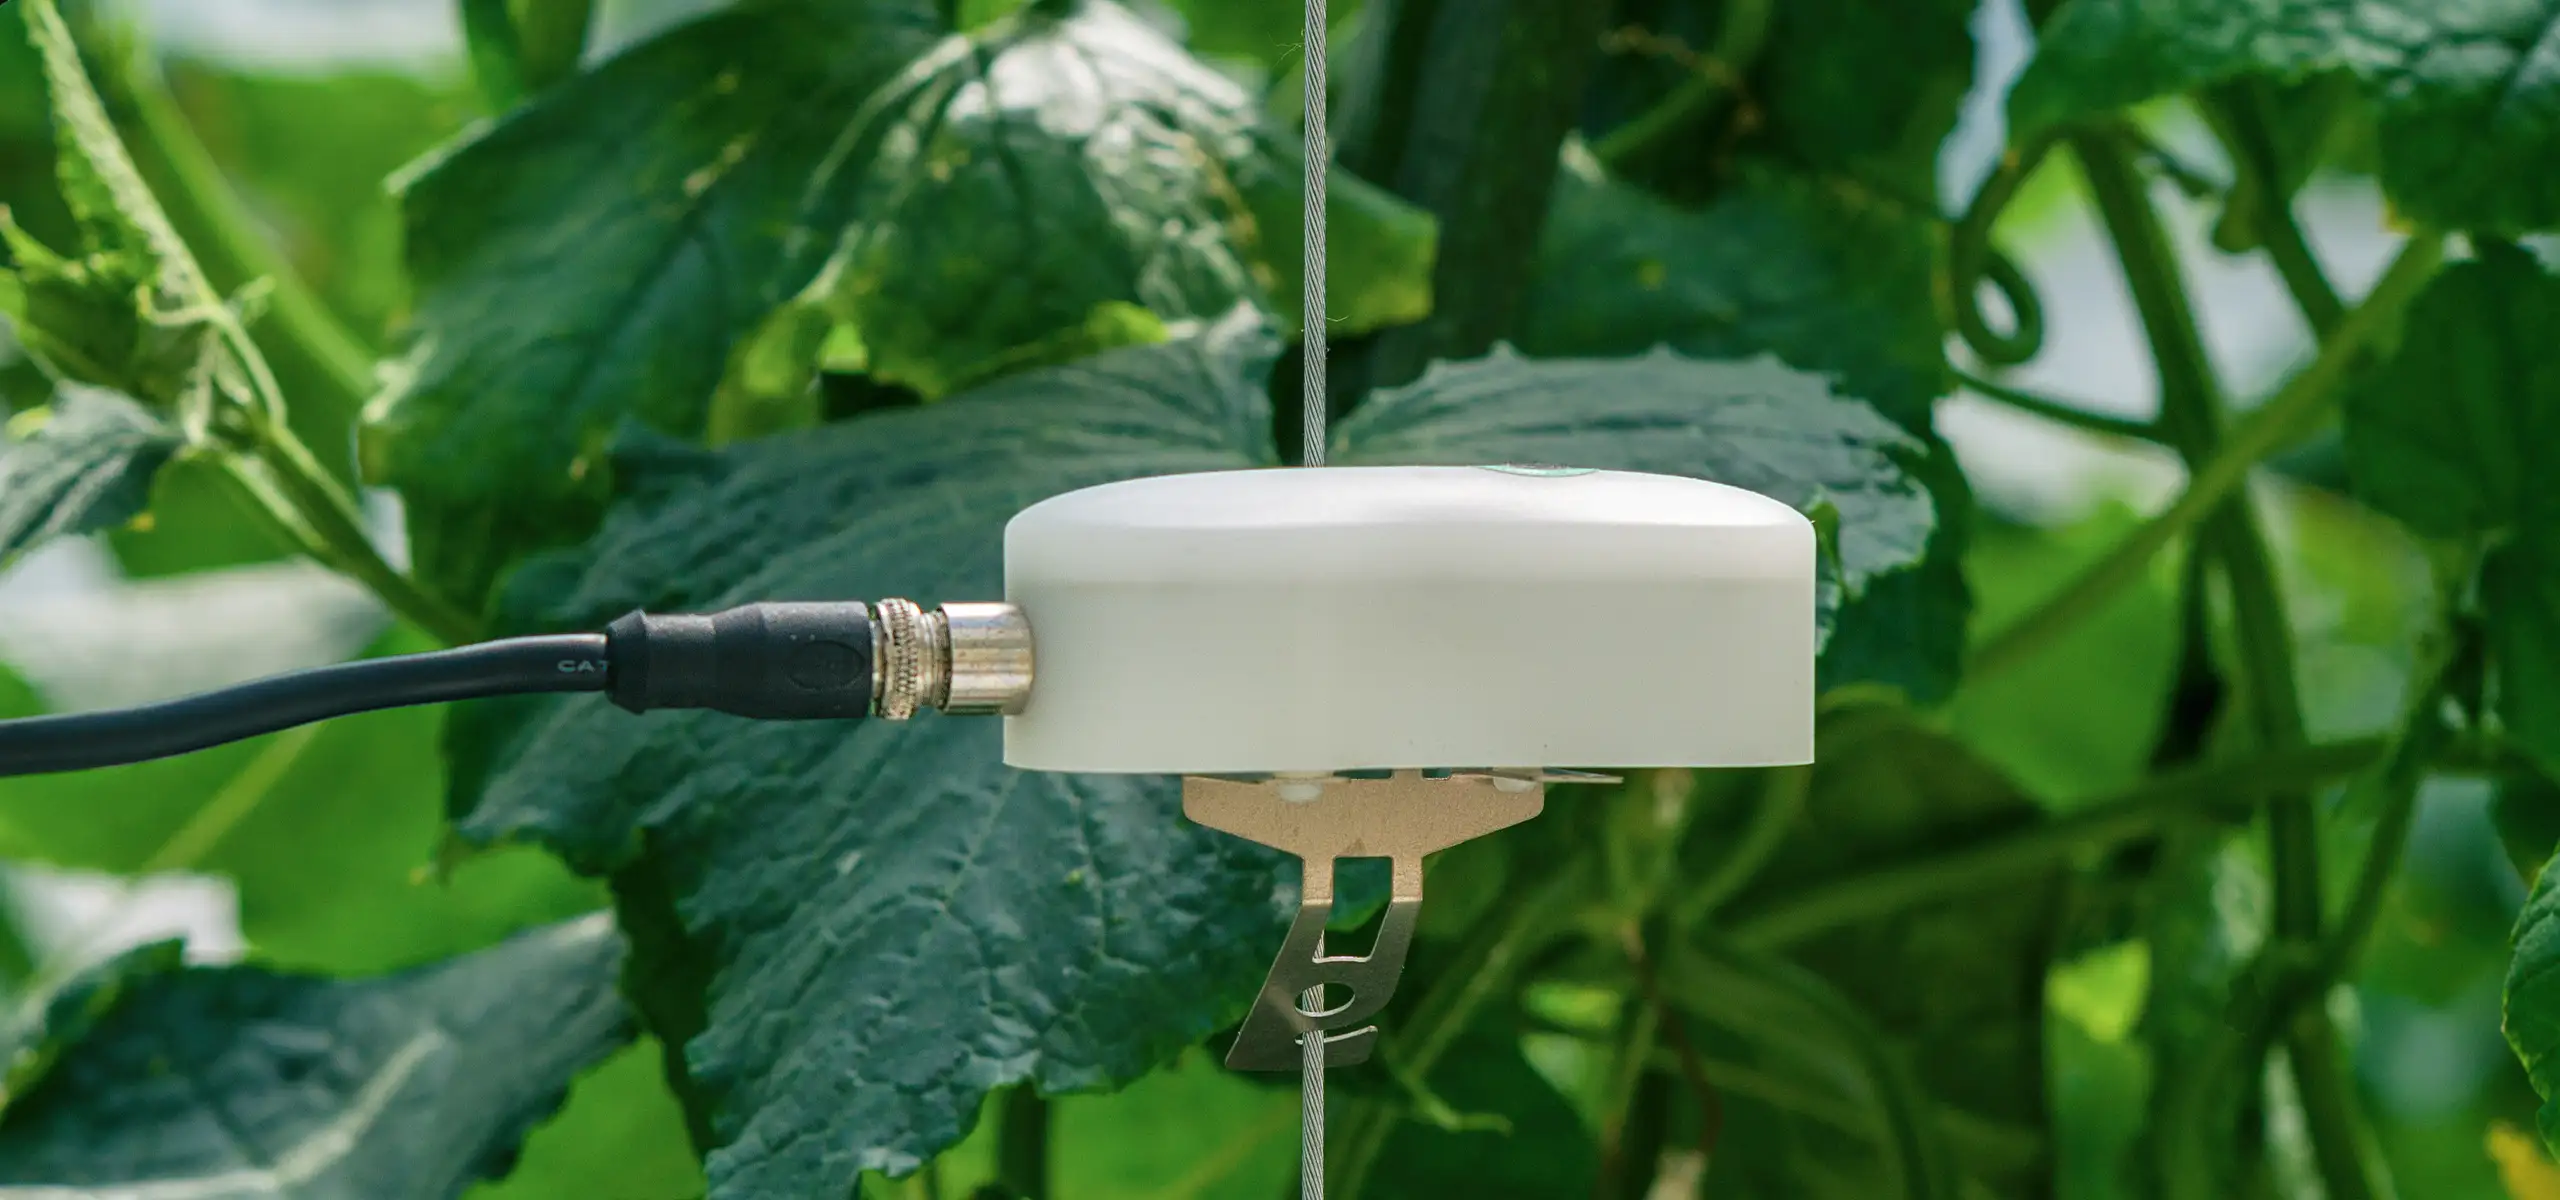 Quantified agricultural sensors designed by Groen & Boothman Amsterdam